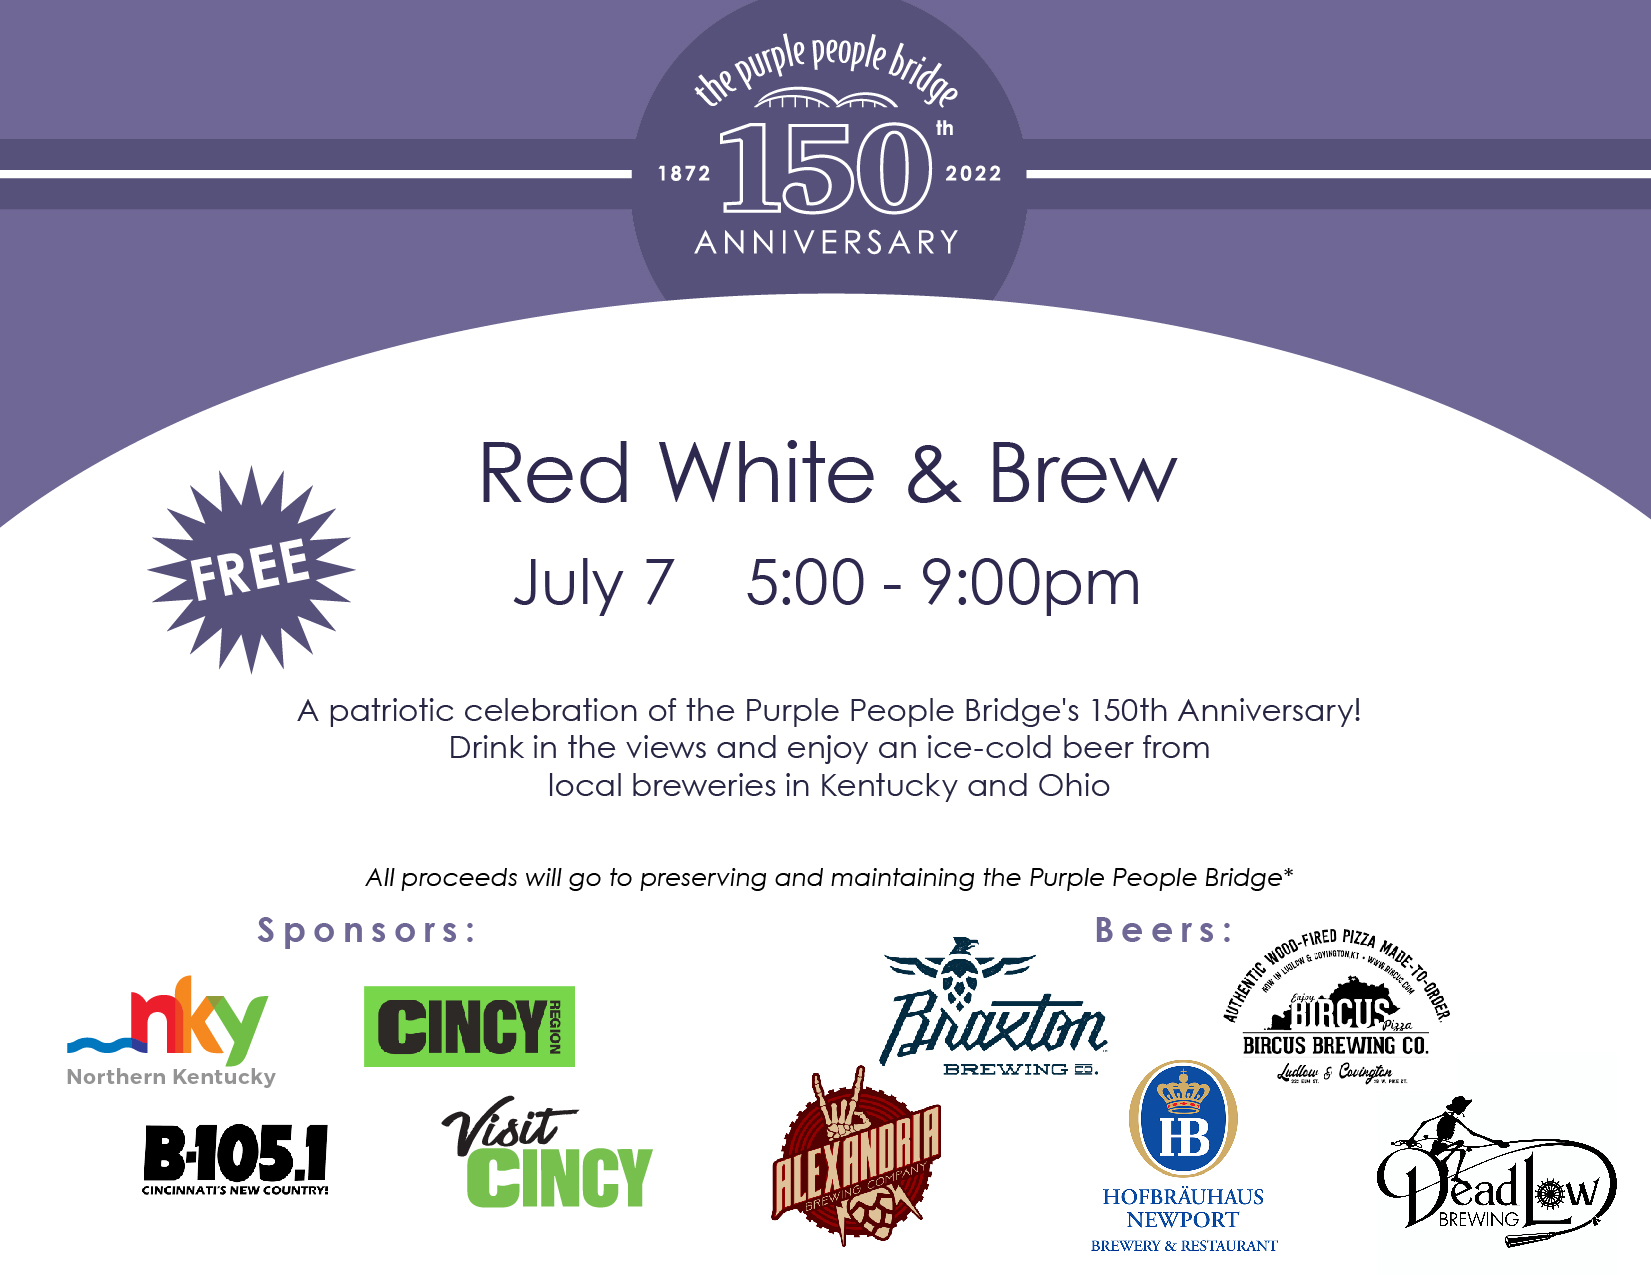 Red White & Brew | July 7 -- 5:00 - 9:00pm | A patriotic celebration of the Purple People Bridge's 150th Anniversary! Drink in the views and enjoy an ice-cold beer from local breweries in Kentucky and Ohio. All proceeds will go to preserving and maintaining the Purple People Bridge* -- sponsors NKY, VistCincy, B105.1, CincyRegion. Beers - Braxton Brewing, Bircus Brewing, Alexandria Brewing, DeadLow Brewing, Hofbrahaus,